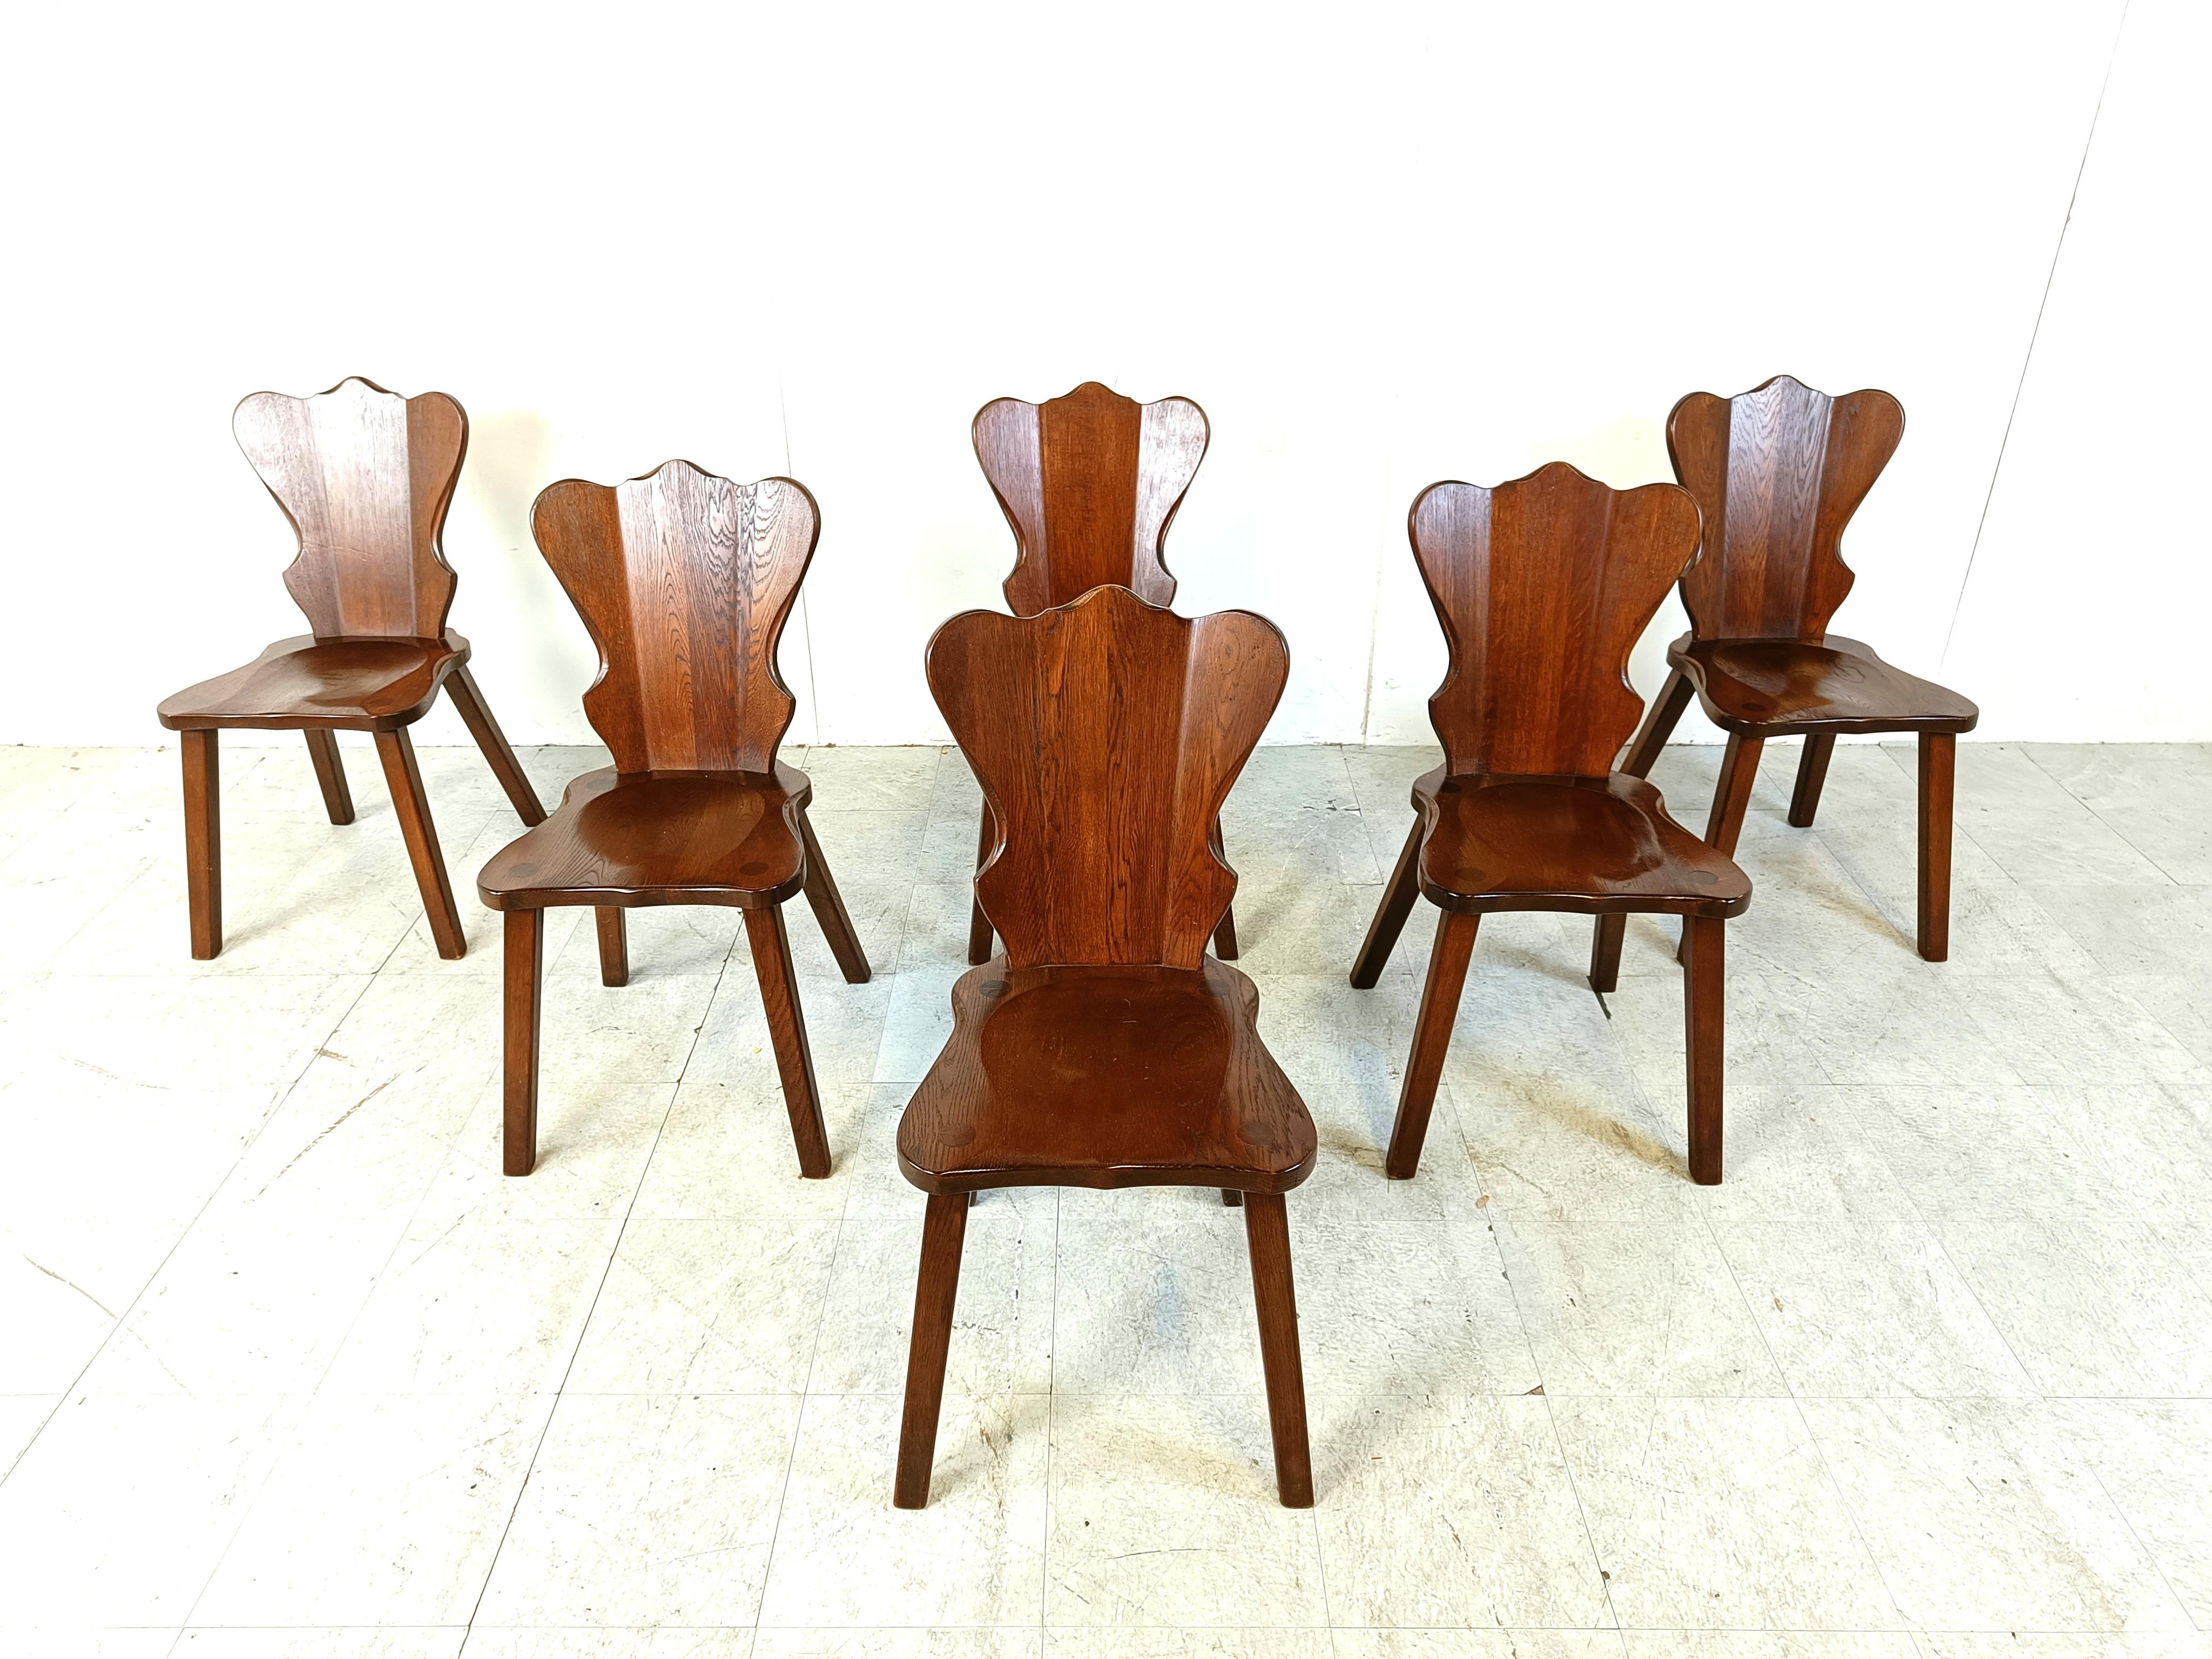 Mid century solid wooden  brutalist dining chairs.

Nice rustic design.

Very sturdy chairs

Good original condition.

1960s - Sweden

Dimensions:
Height: 90cm
Seat height: 47cm
Width: 45cm
Depth: 50cm

Ref.: 203012

*Price is for the set